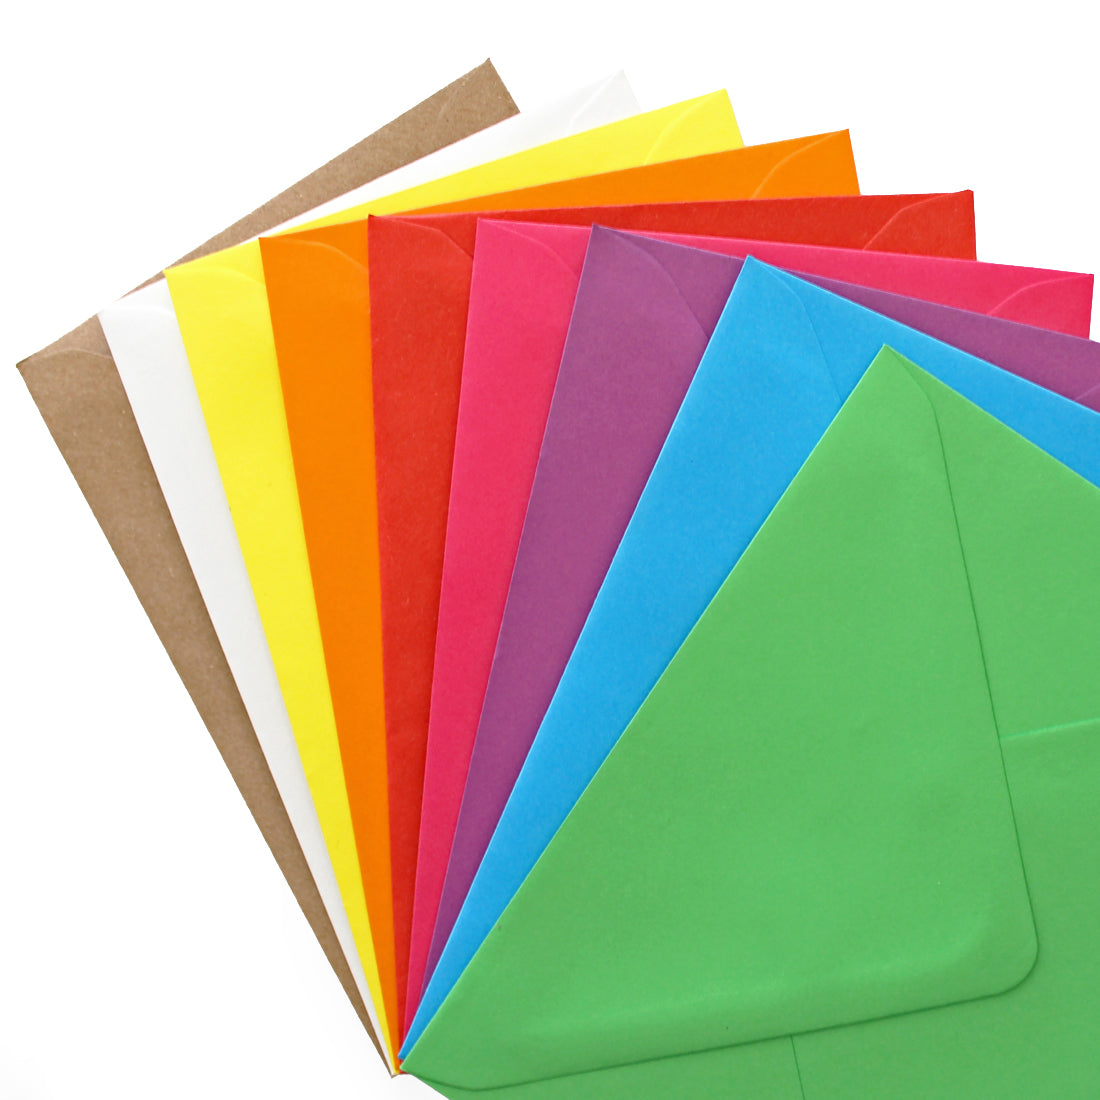 coloured envelopes fanned out